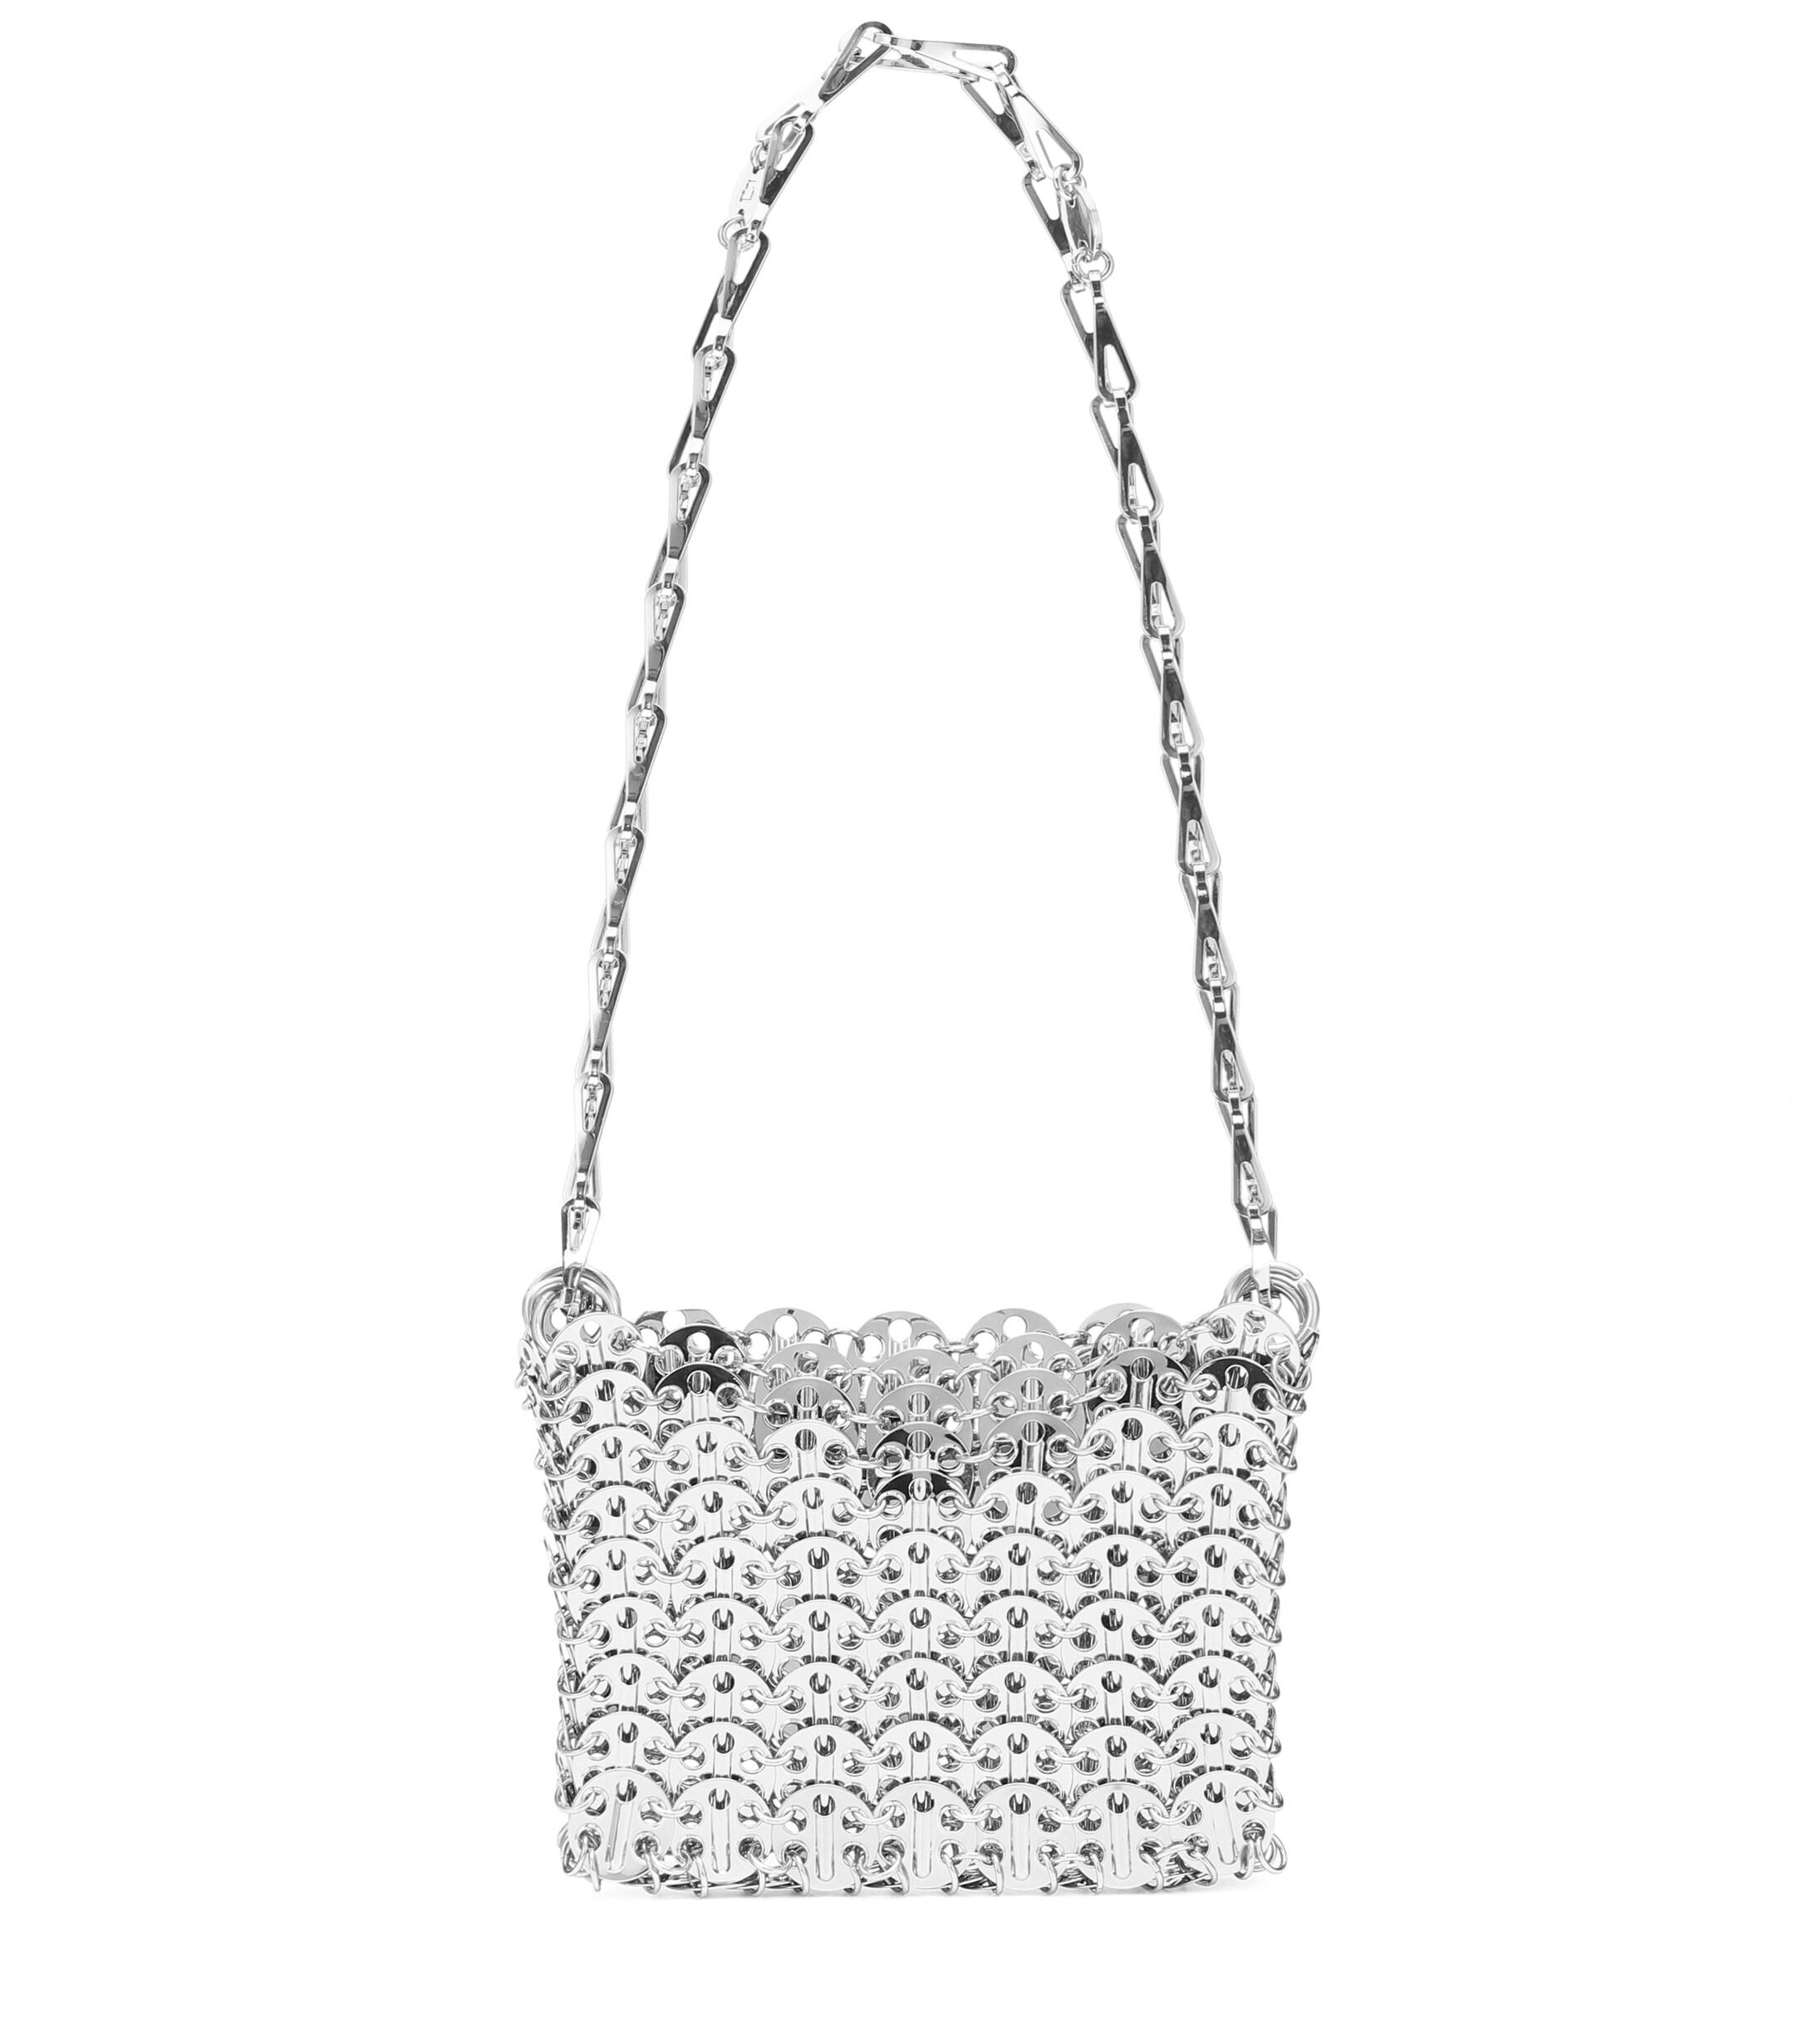 Paco Rabanne Iconic 1969 Shoulder Bag in Silver (Metallic) - Lyst